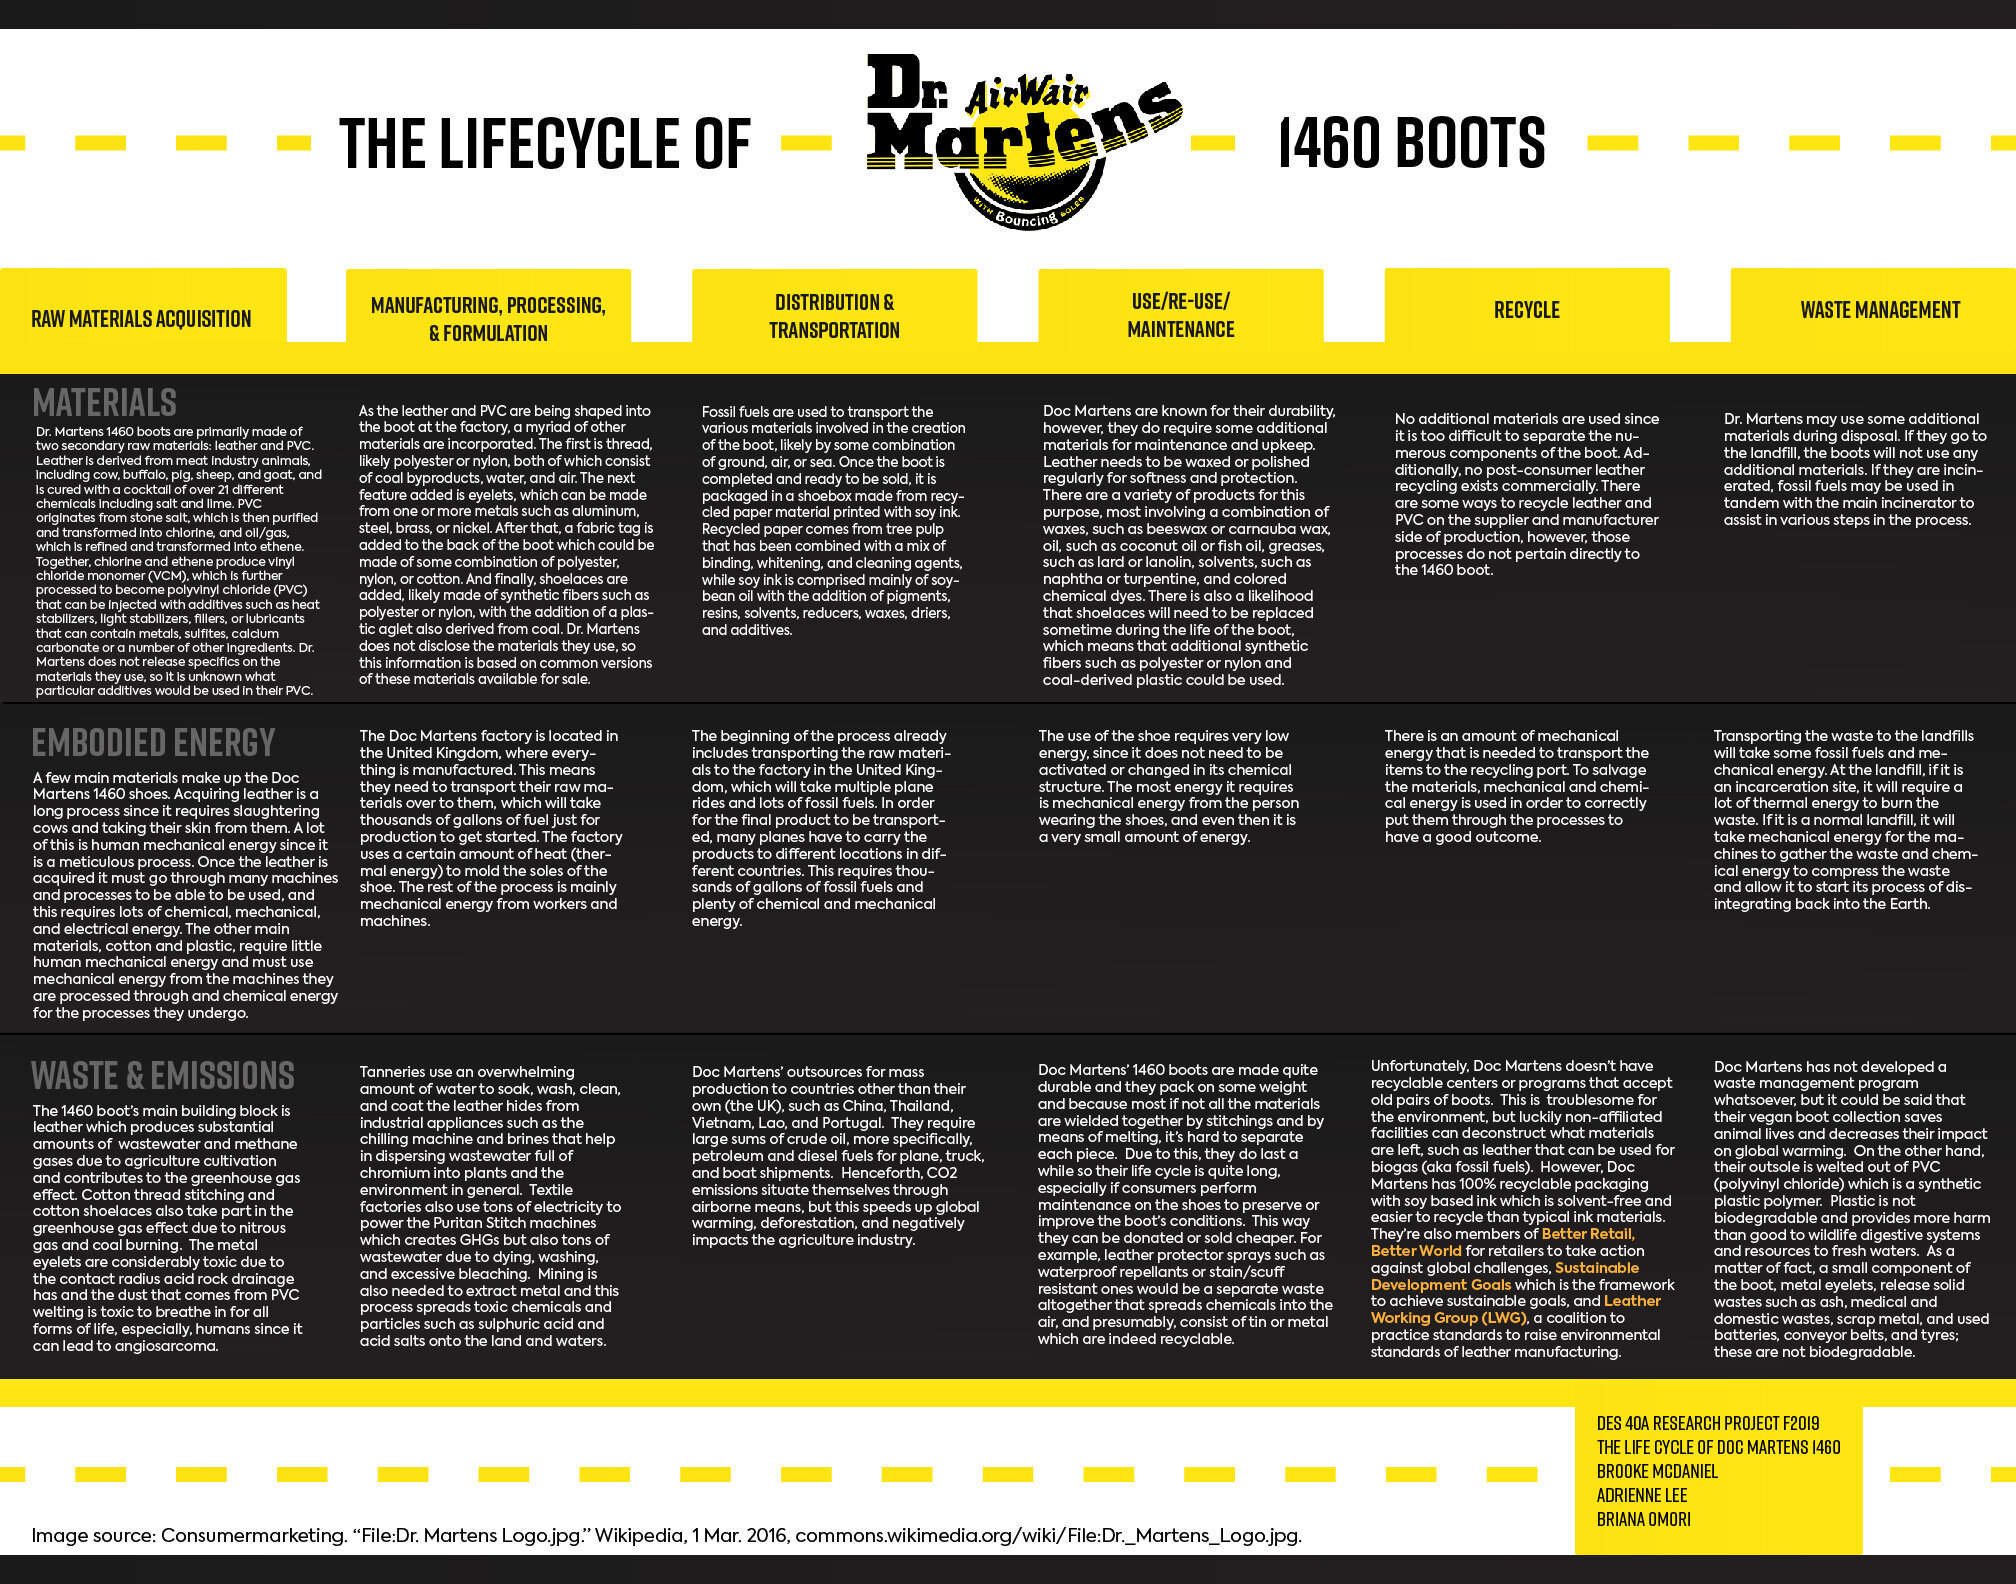 Dr. Martens 1460 Boot — Design Life-Cycle